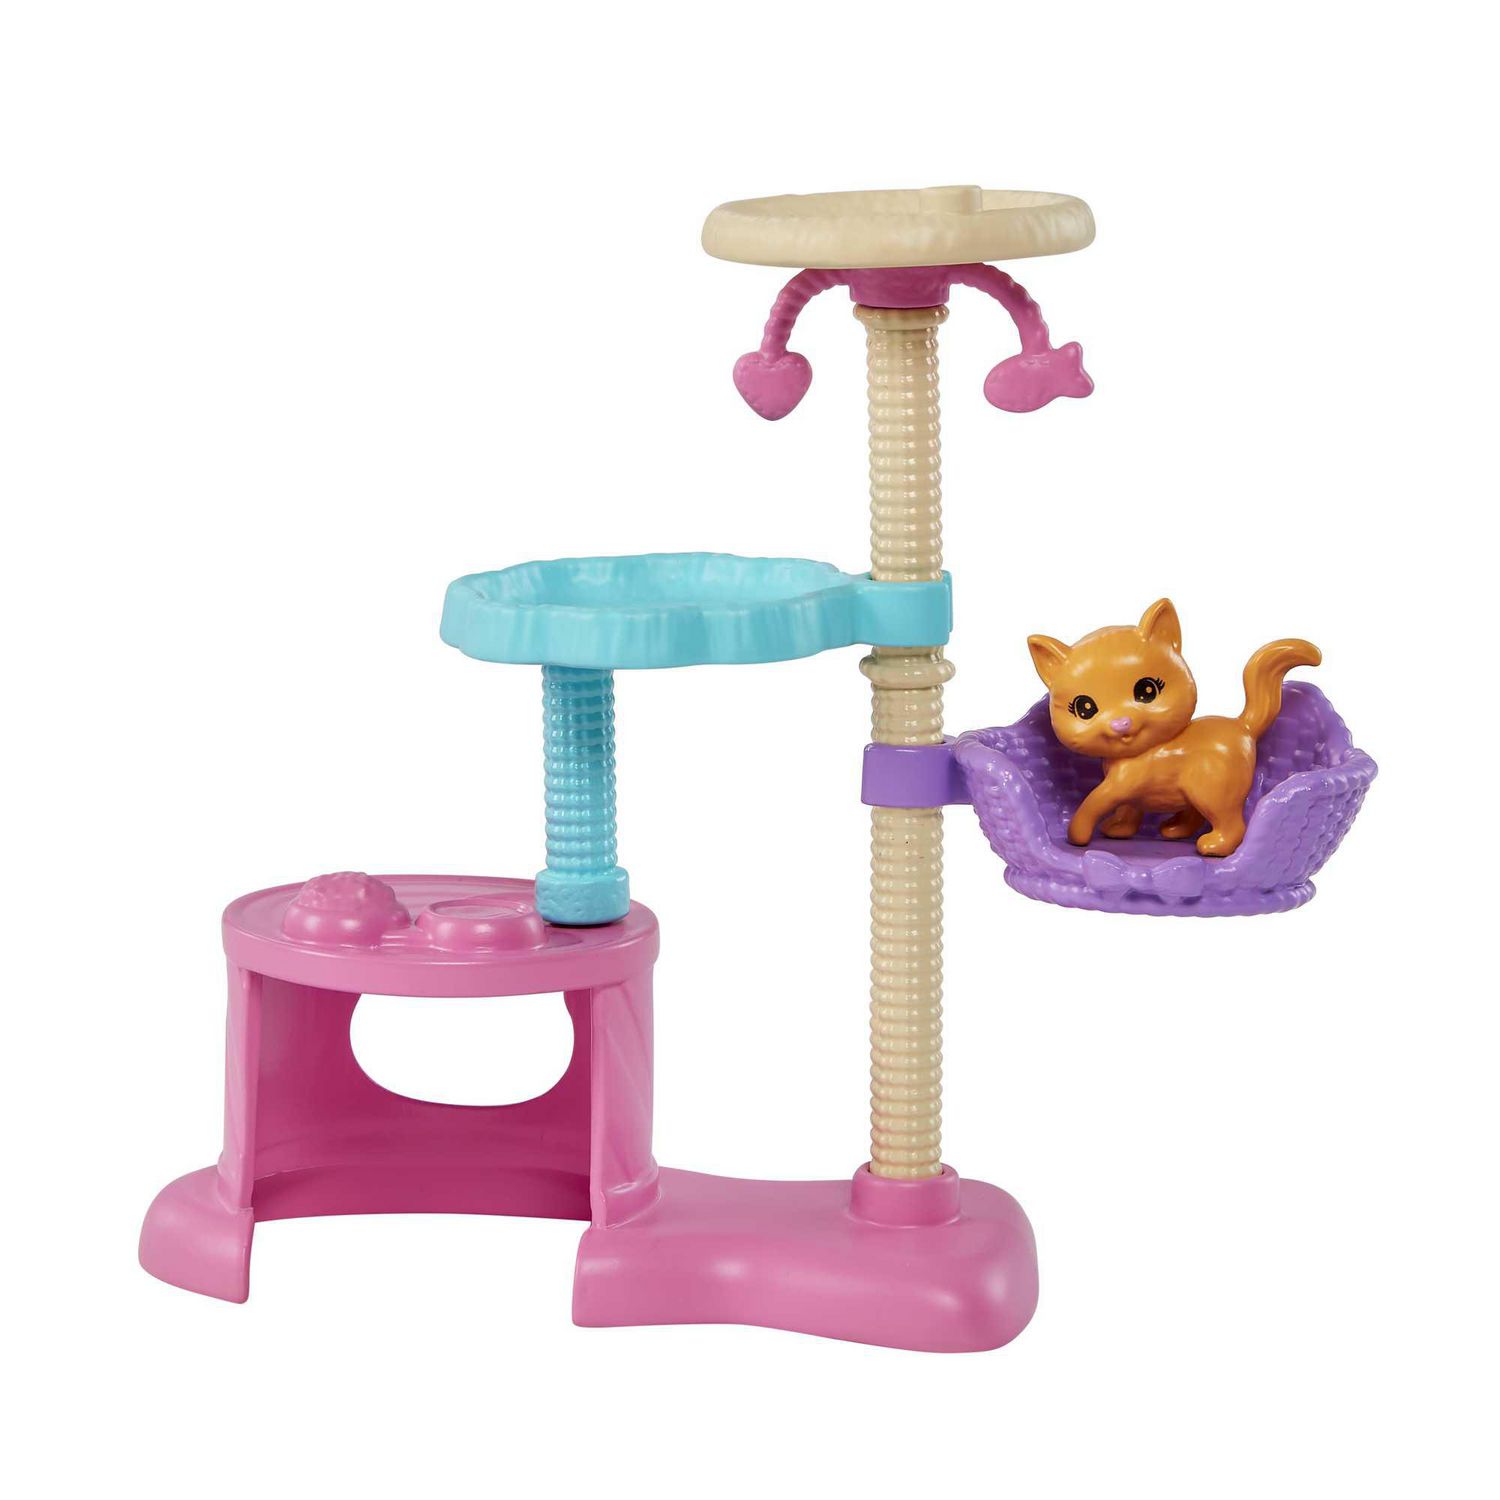 Barbie Kitty Condo Doll and Pets Playset with Barbie Doll